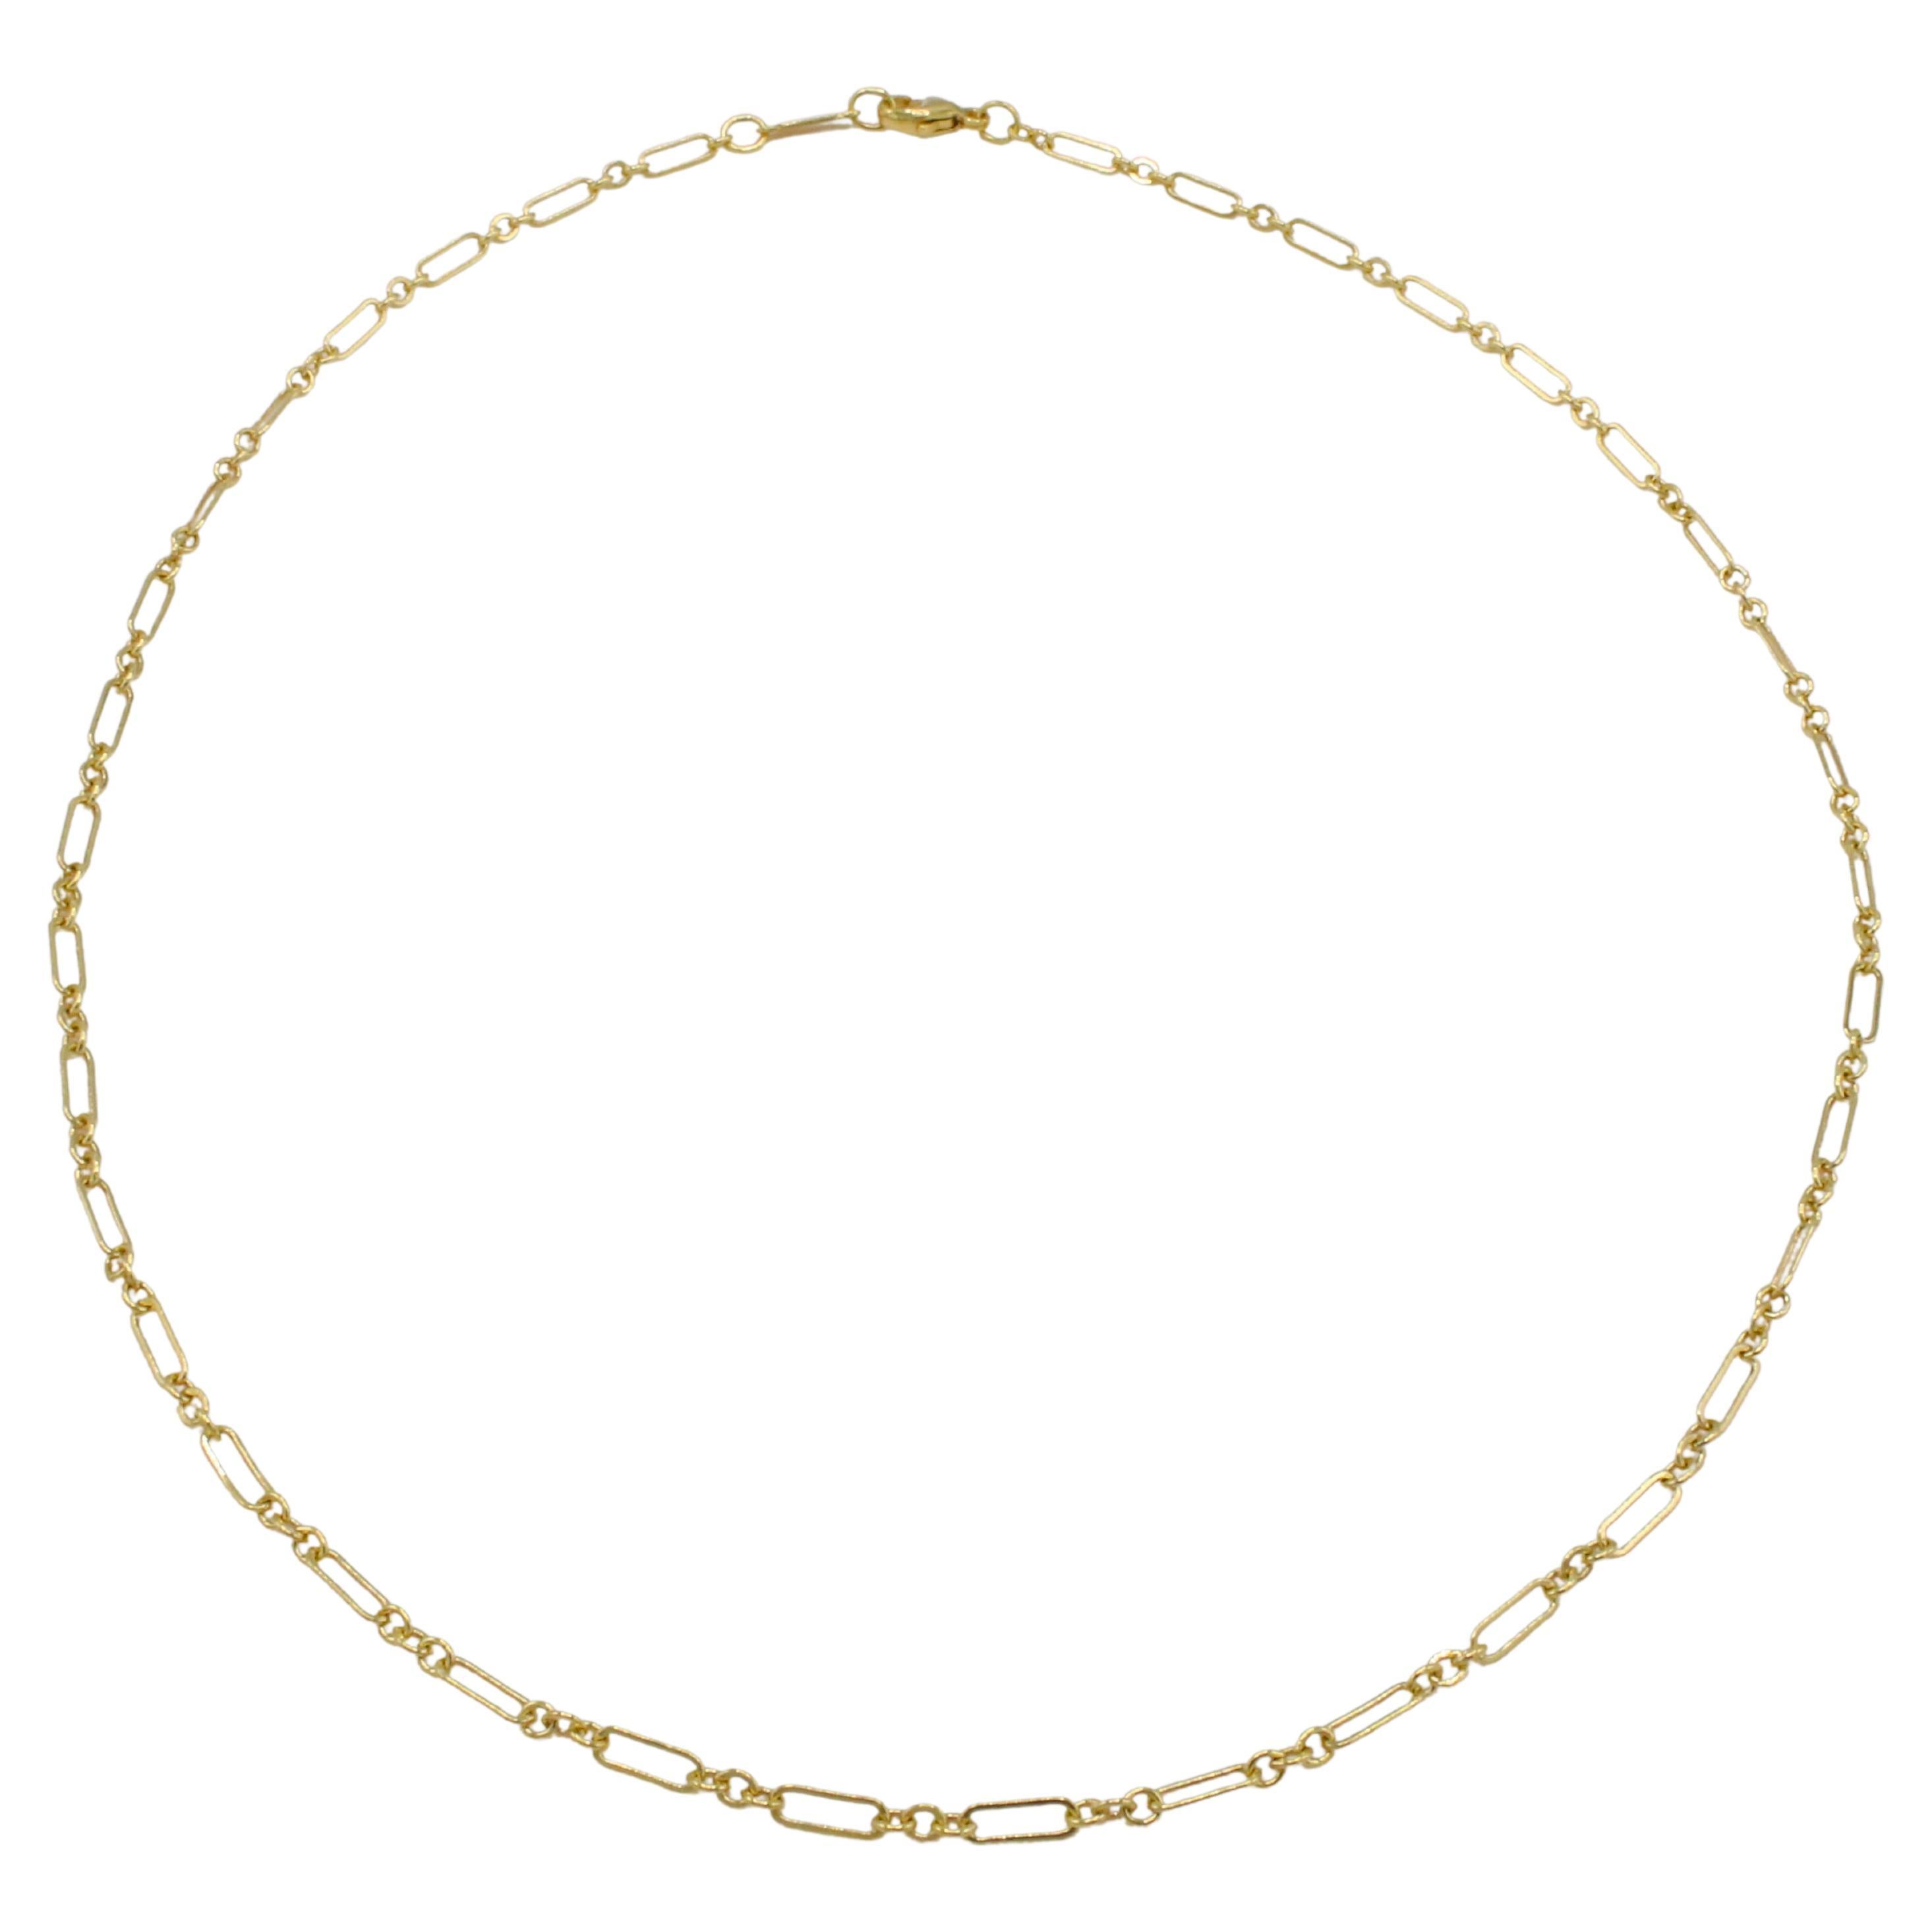 Tiffany & Co. 18 Karat Yellow Gold Paper Clip Chain Link Necklace 
Metal: 18 karat yellow gold 750
Weight: 4.10 grams
Links: 6.5 x 2.5mm
Length: 16 inches
Clasp: Lobster 
